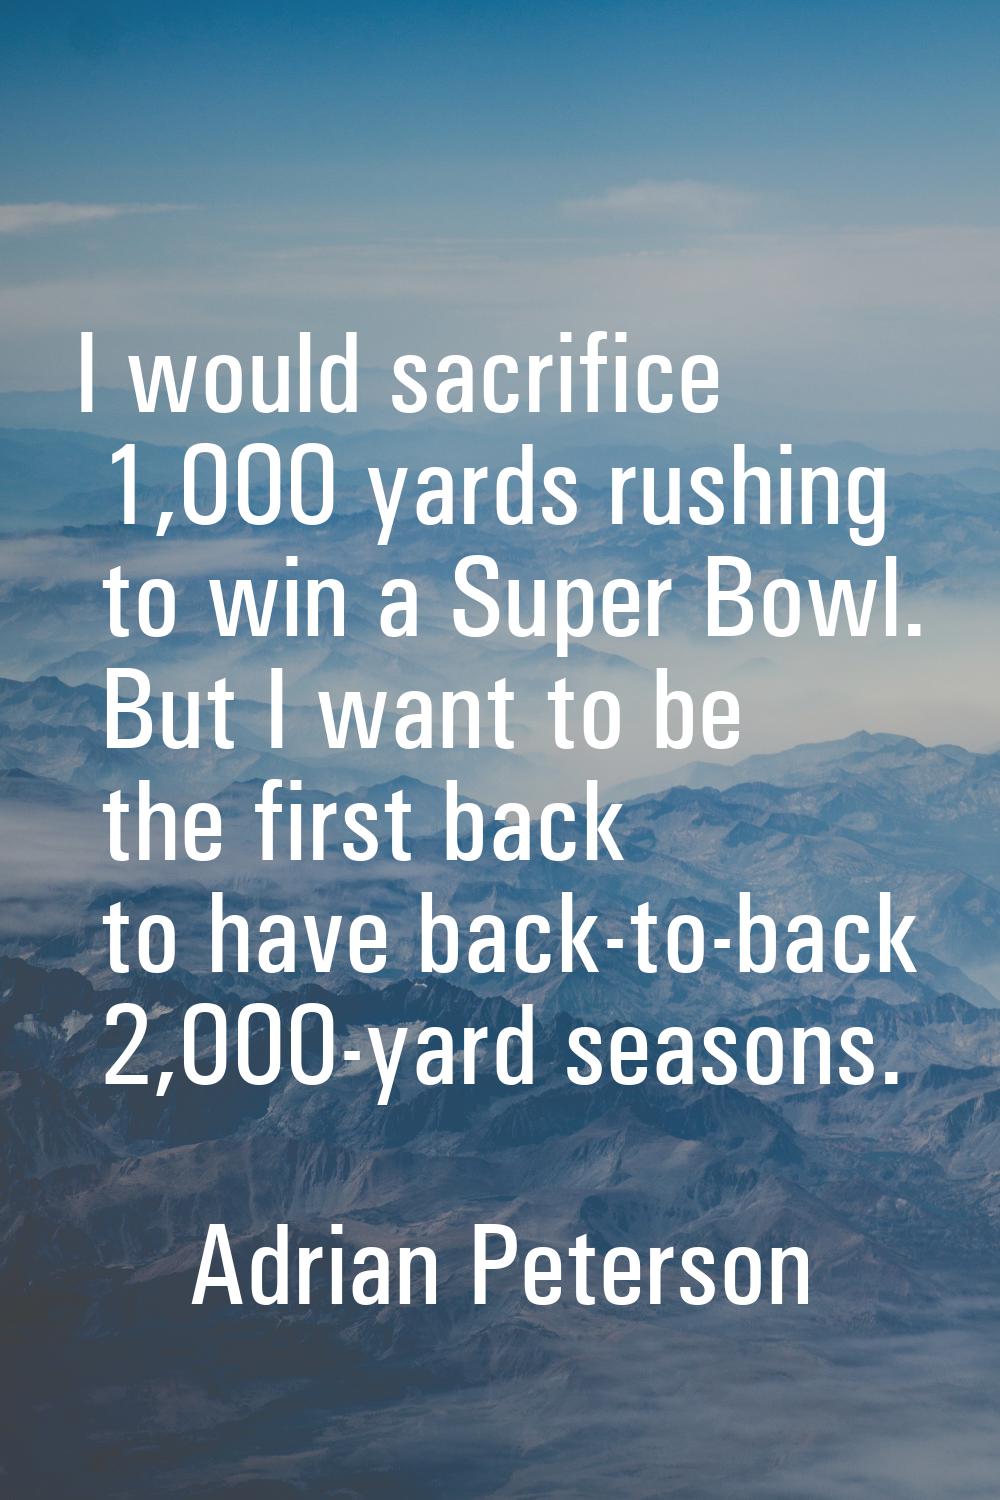 I would sacrifice 1,000 yards rushing to win a Super Bowl. But I want to be the first back to have 